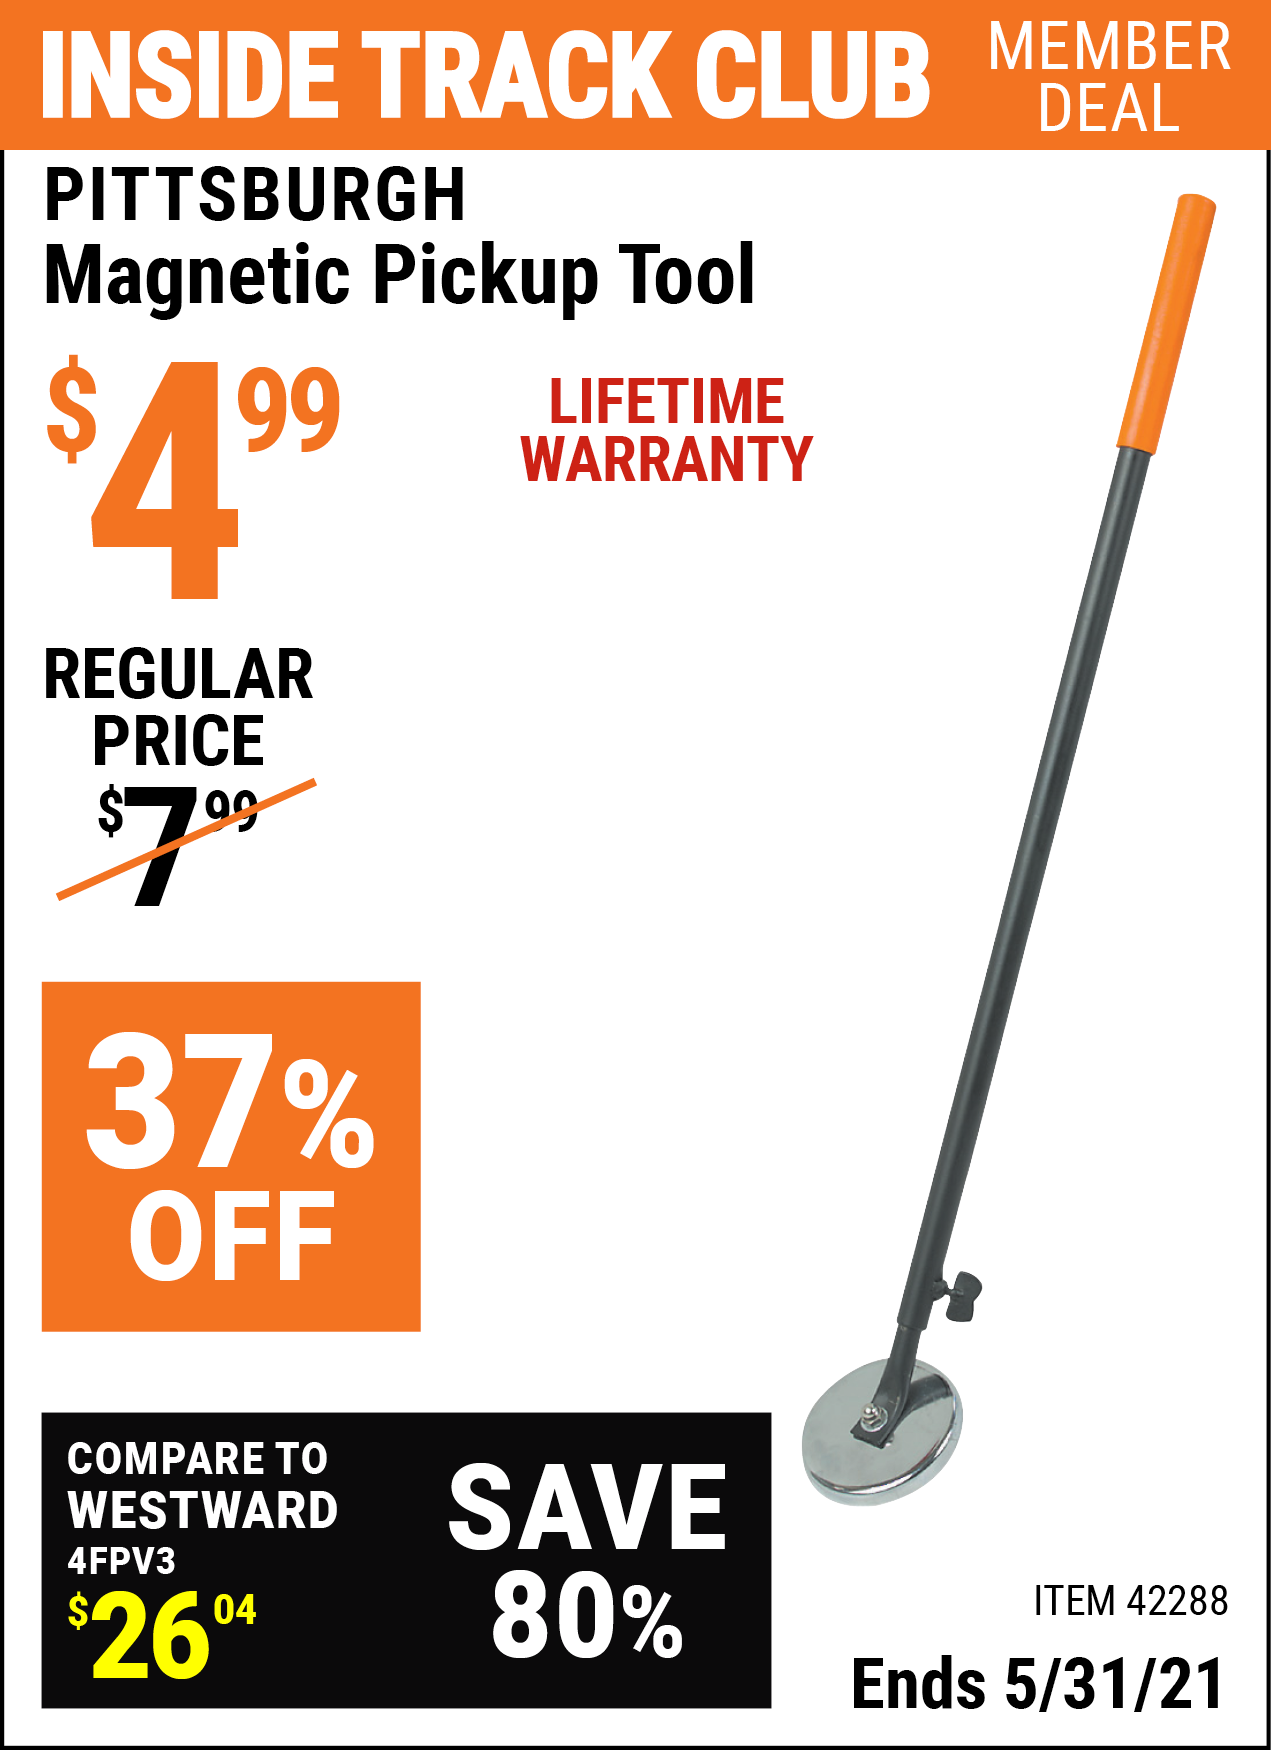 Inside Track Club members can buy the PITTSBURGH Heavy Duty Magnetic Pickup Tool (Item 42288) for $4.99, valid through 5/31/2021.